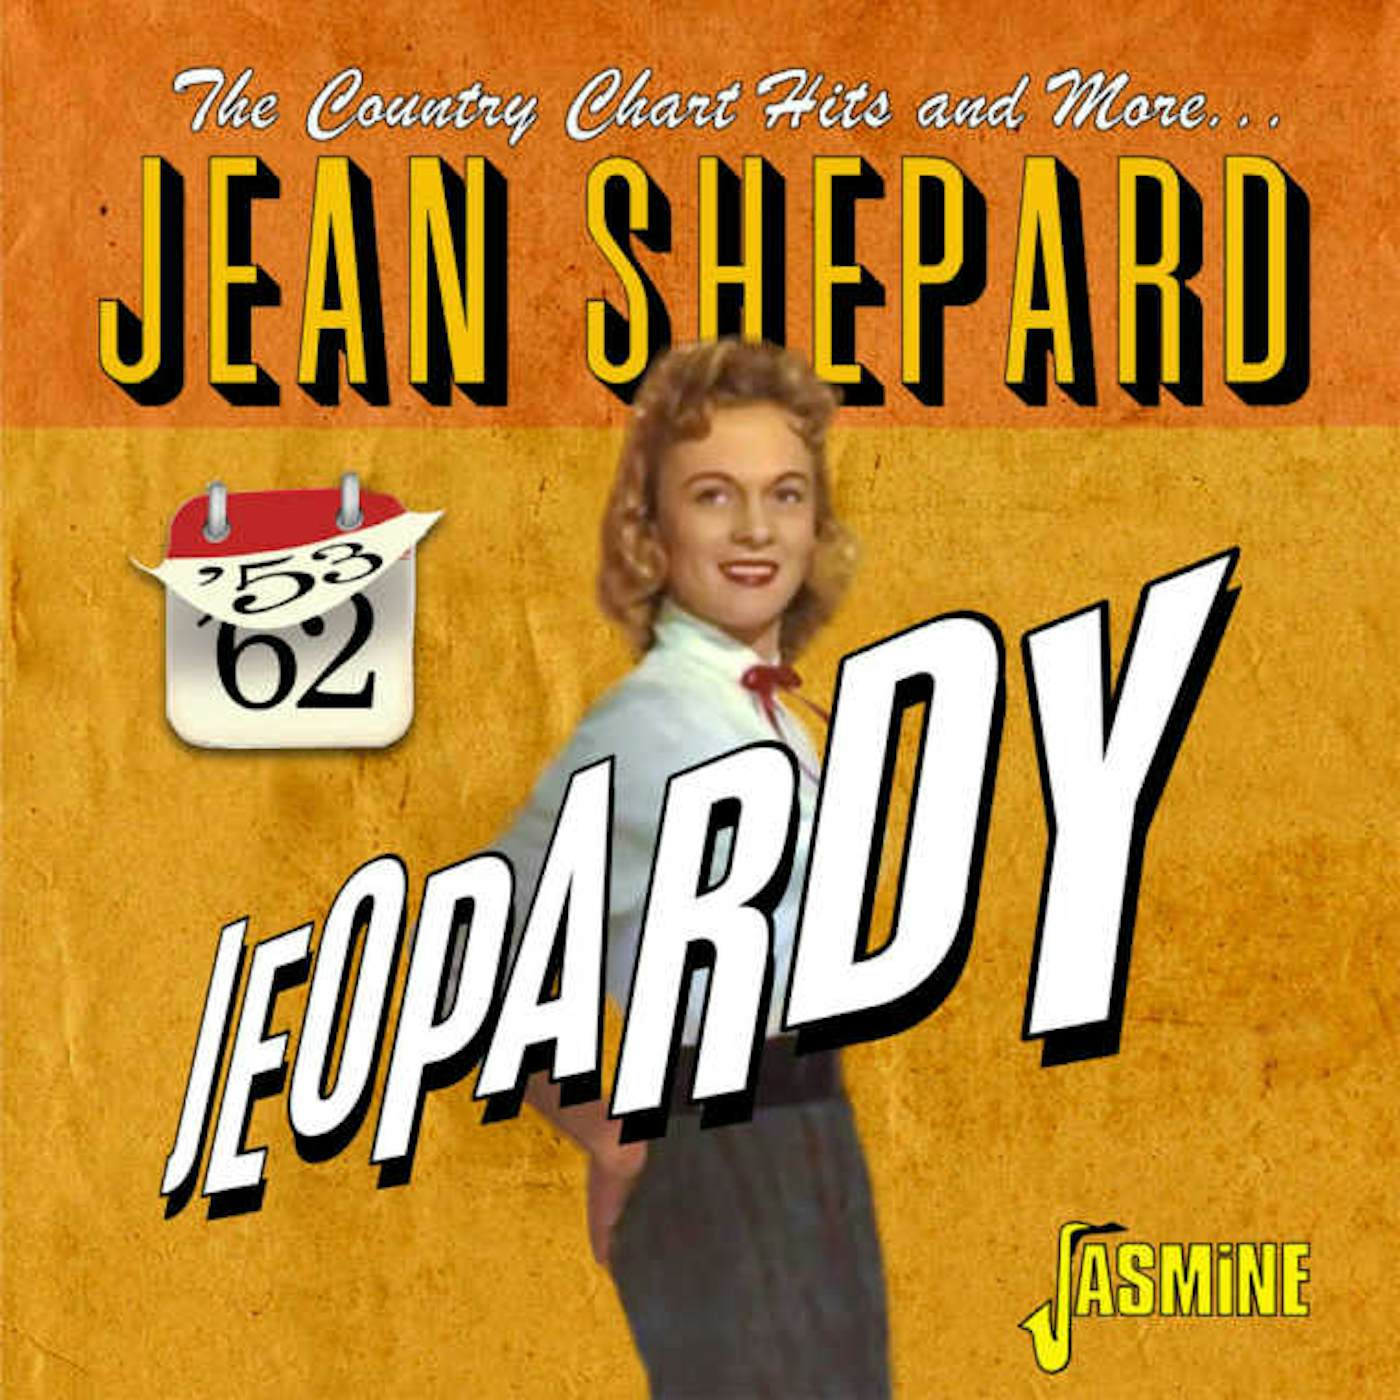 Jean Shepard JEOPARDY: THE COUNTRY CHART HITS & MORE 1953-1962 CD